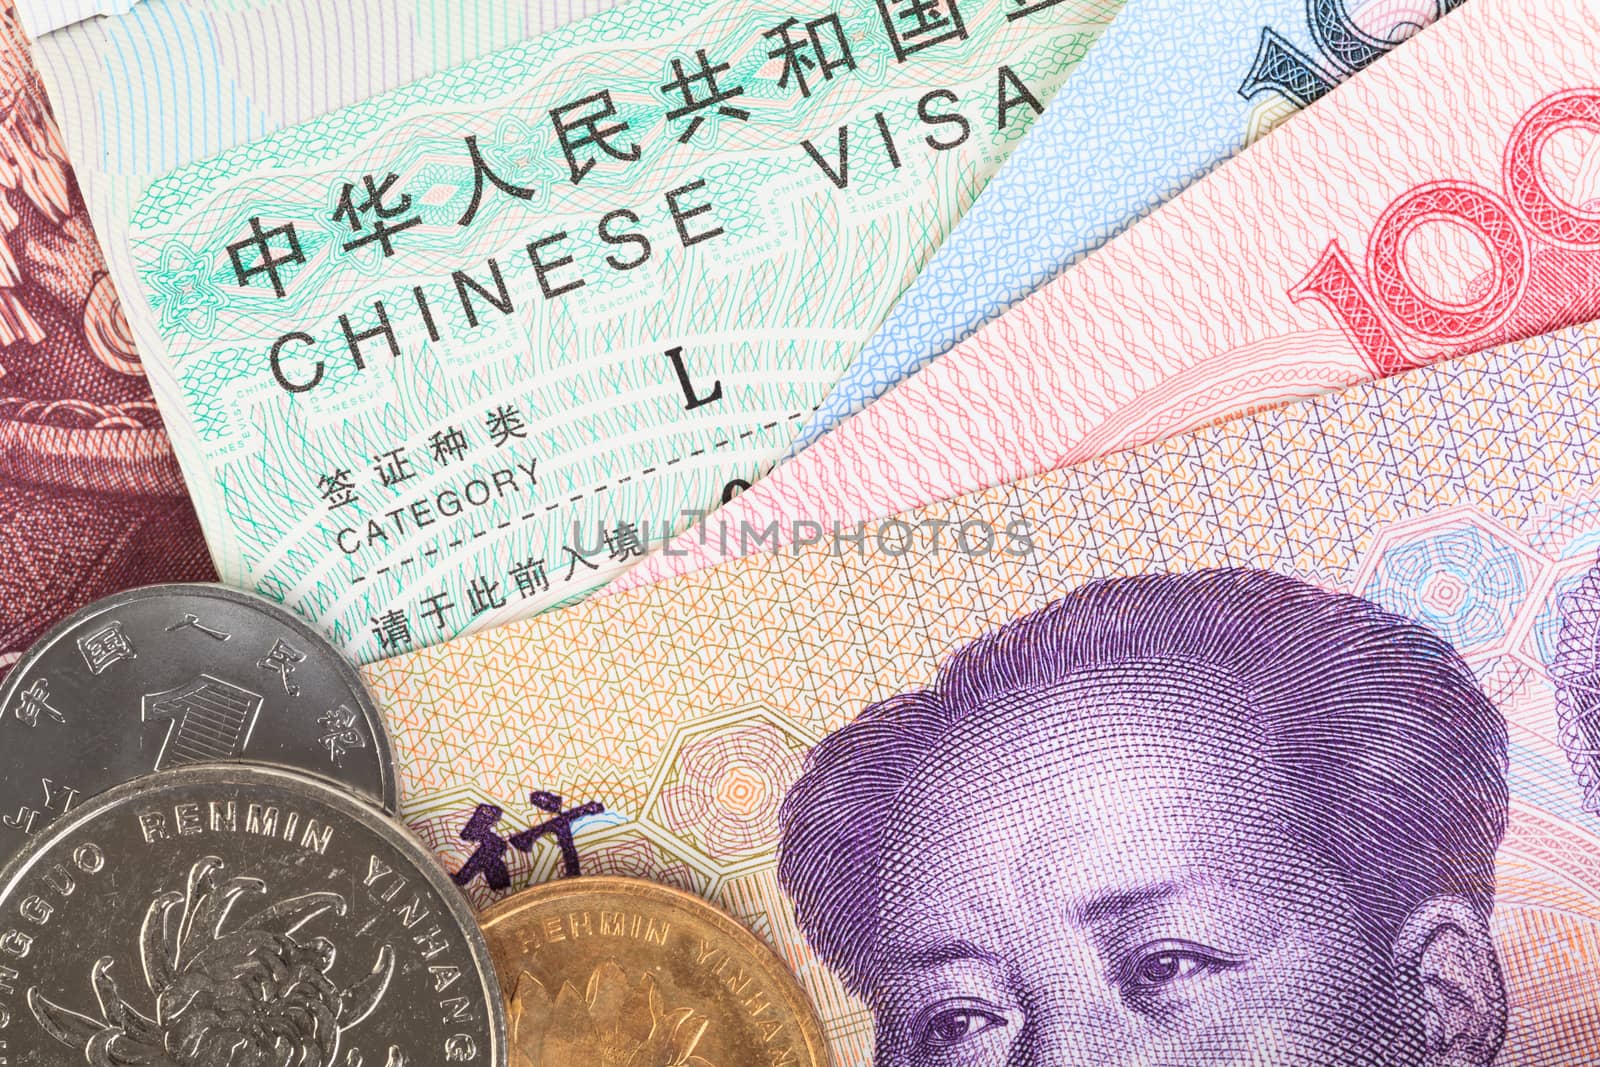 Chinese or Yuan banknotes money and coins from China's currency with visa for travel concept, close up view as background